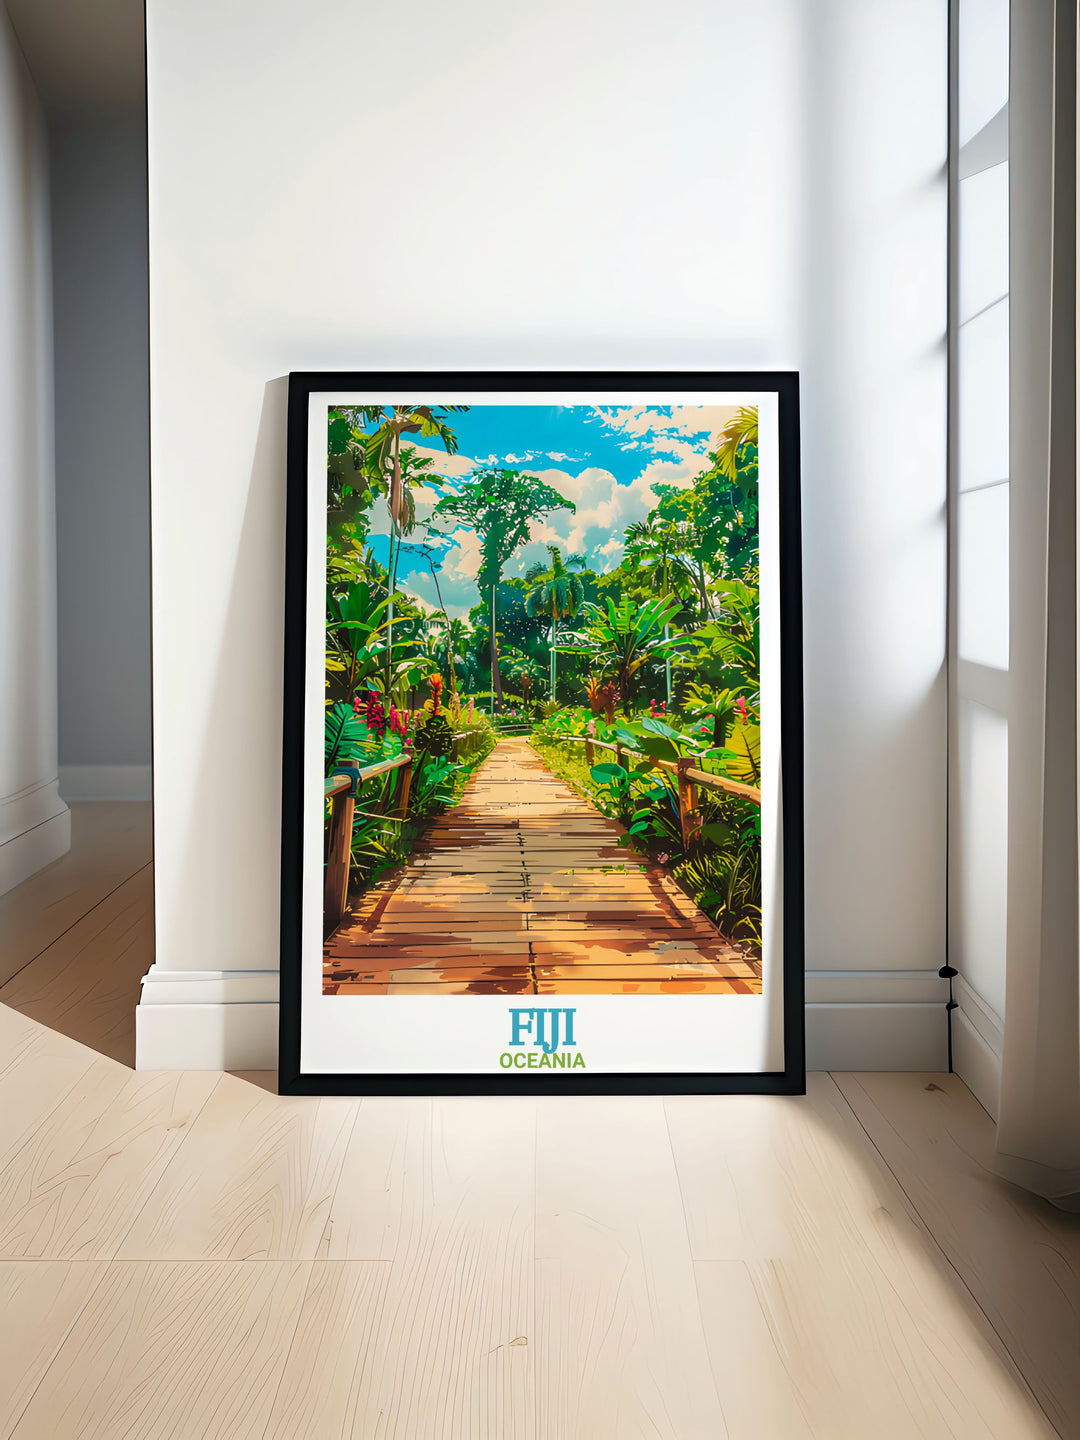 Garden of the Sleeping Giant travel poster showcasing Fijis lush botanical beauty perfect for adding vibrant color to any space. This Fiji poster captures the exotic charm of the Garden of the Sleeping Giant with intricate details and rich hues.